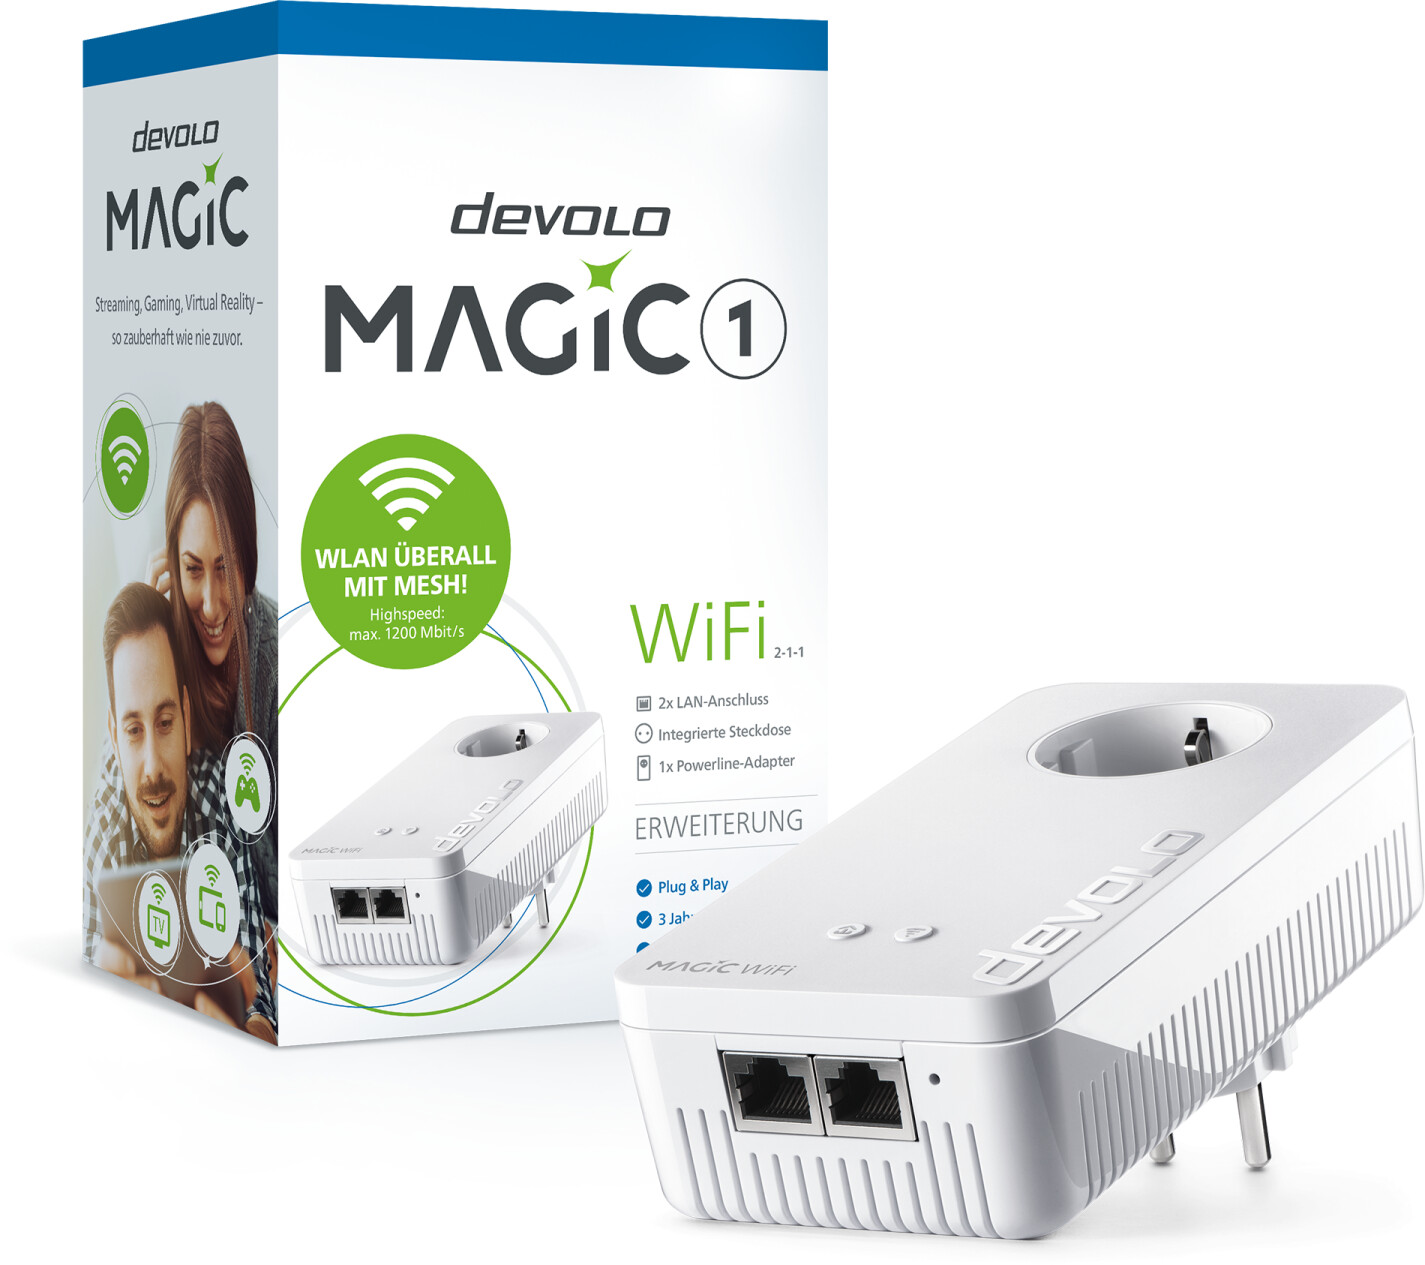 Buy devolo Magic 1 WiFi Add-On from £99.99 (Today) – Best Deals on